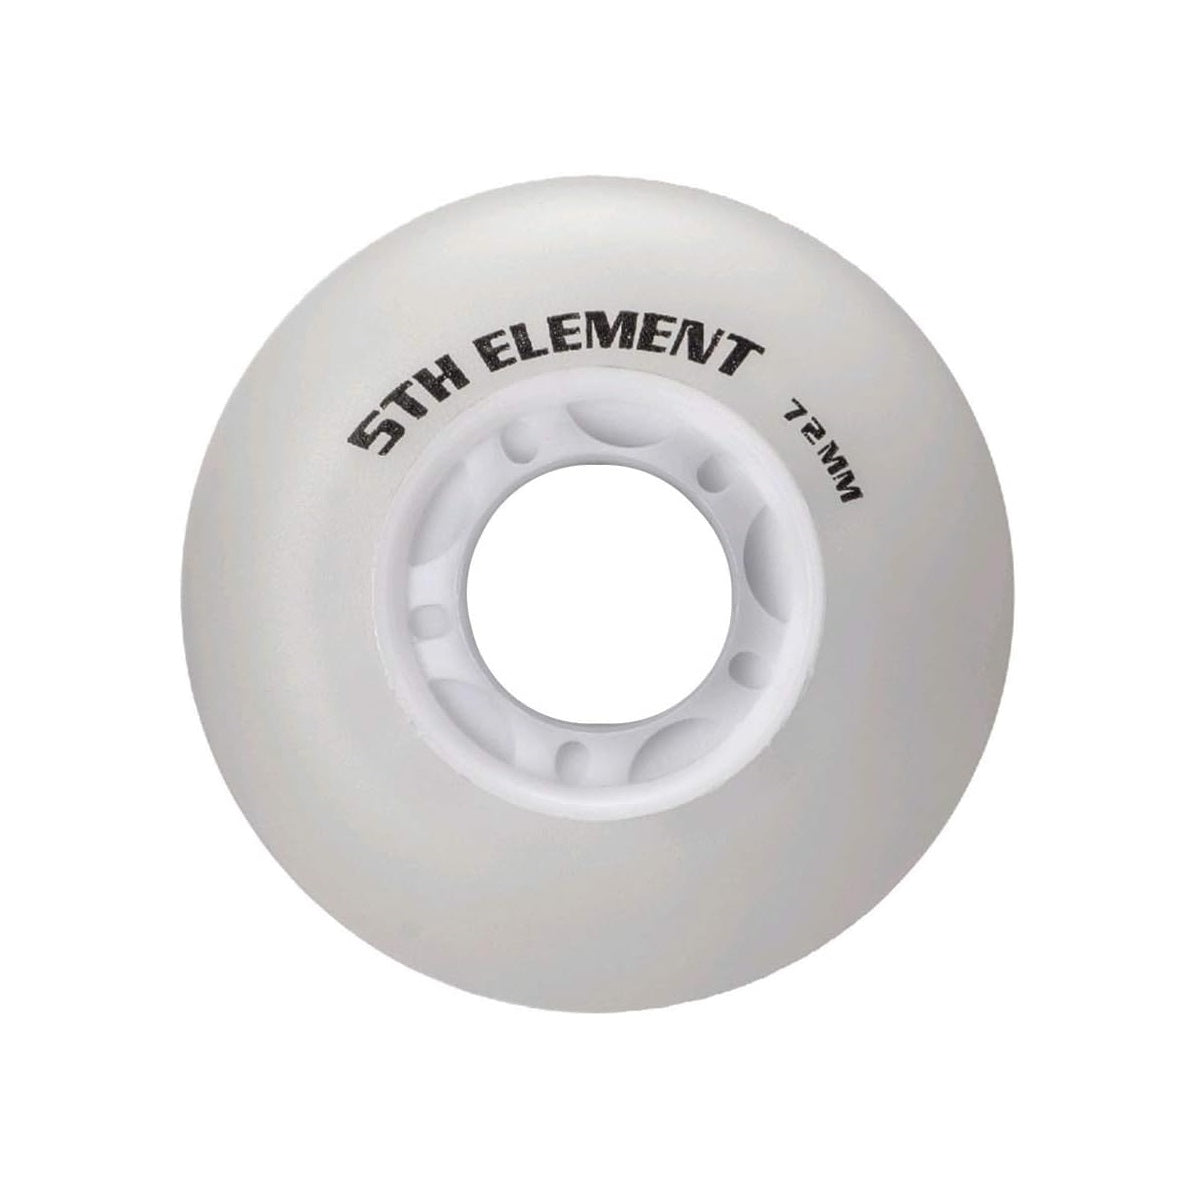 5th Element 72mm Pink Light Up Replacement Wheels - 8 Pack